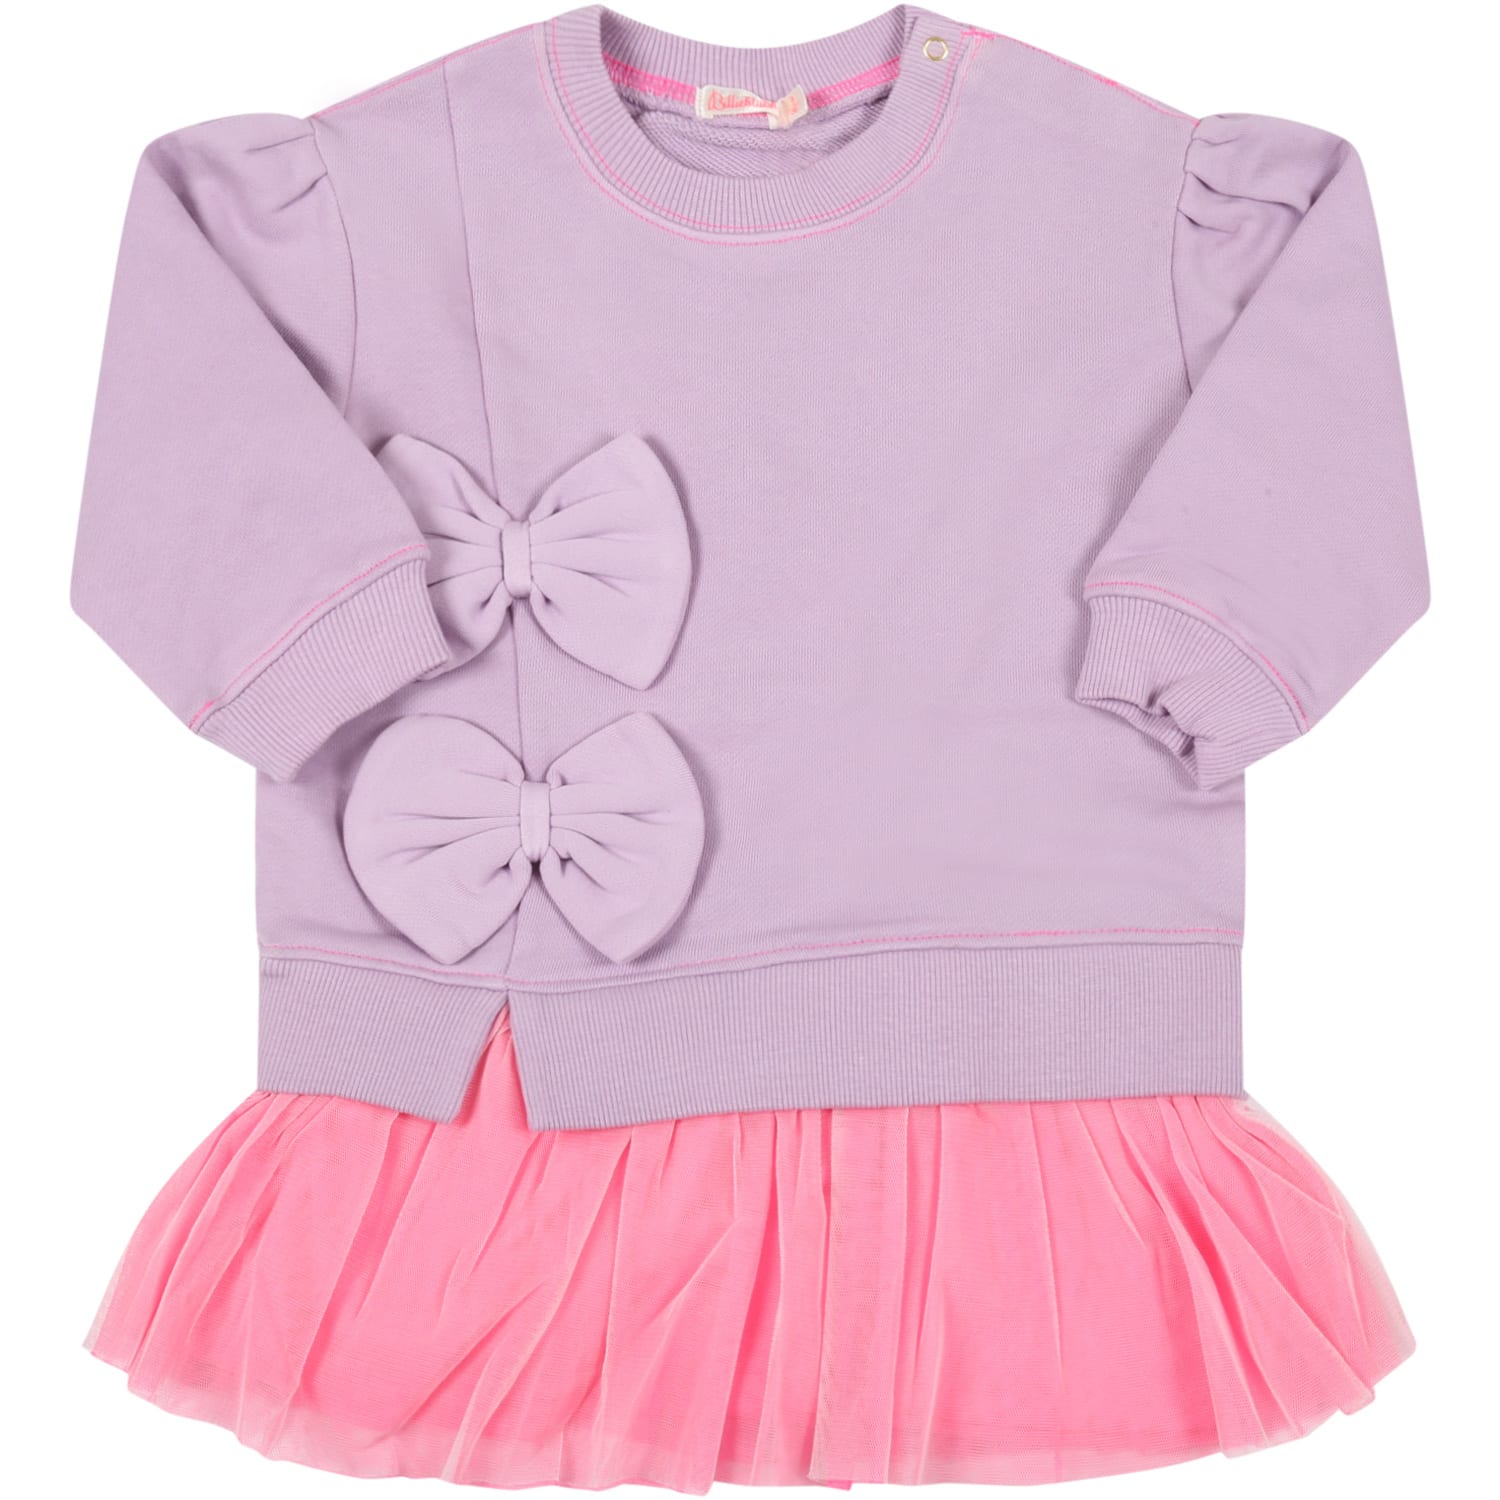 Billieblush Multicolor Dress For Girl With Bows